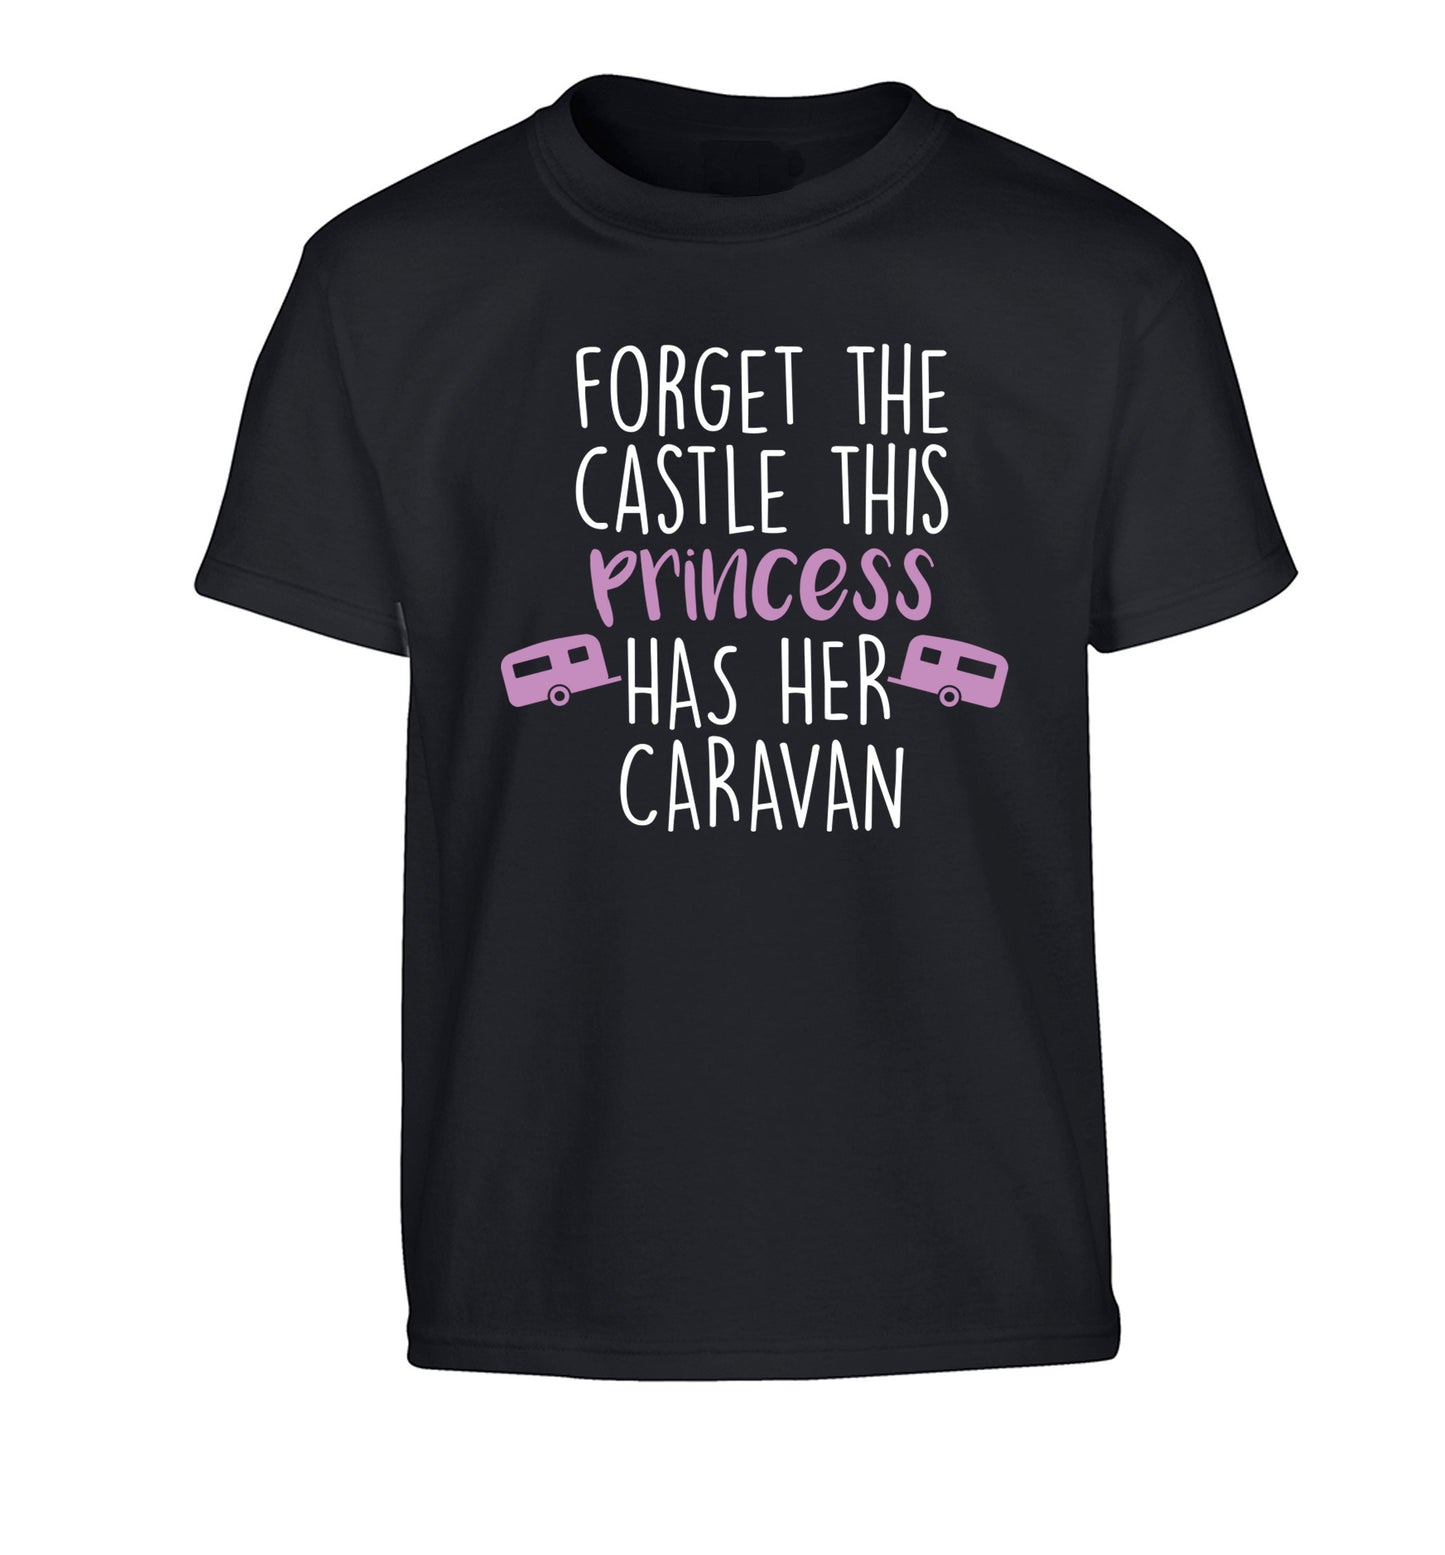 Forget the castle this princess lives at the caravan Children's black Tshirt 12-14 Years